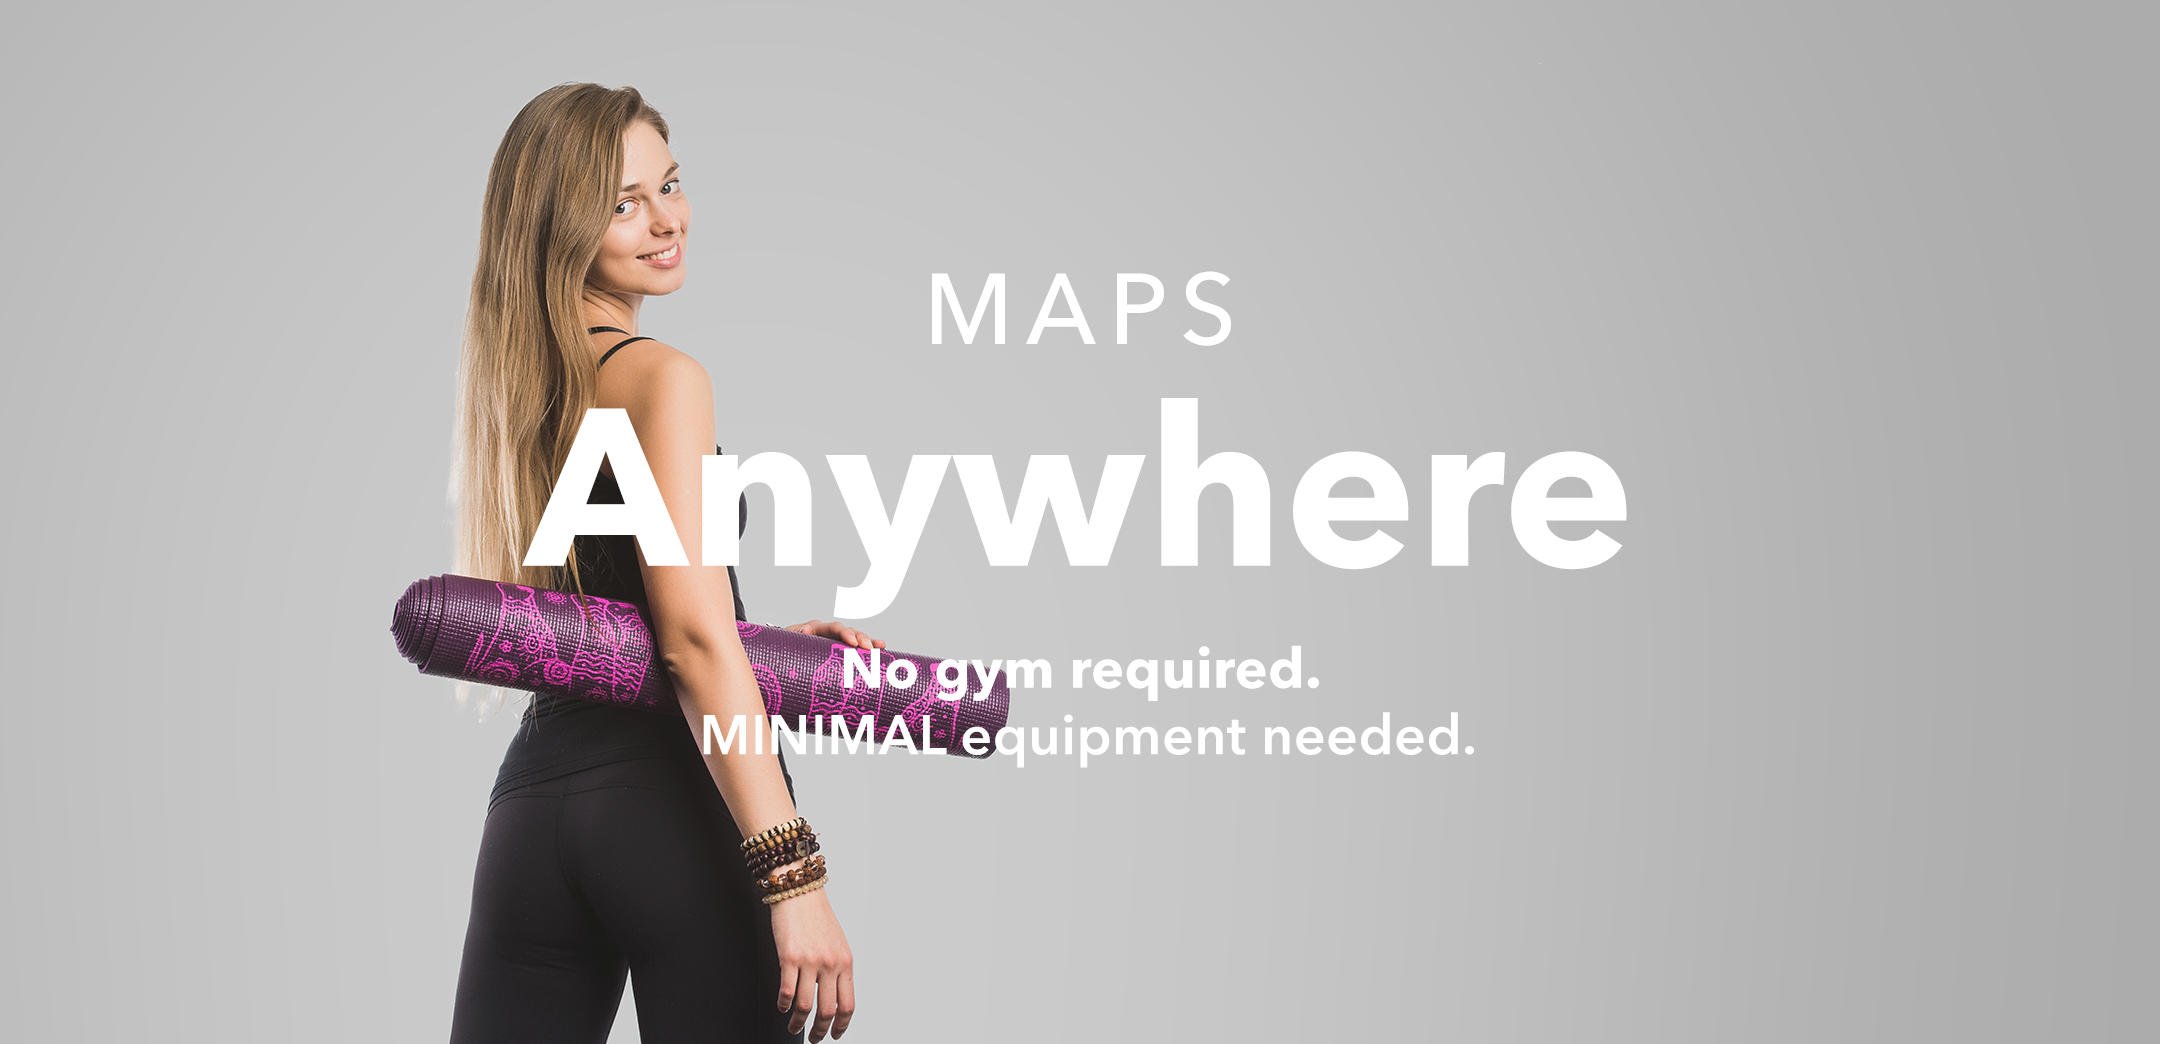 MAPS Fitness Products | MAPS Anywhere Product